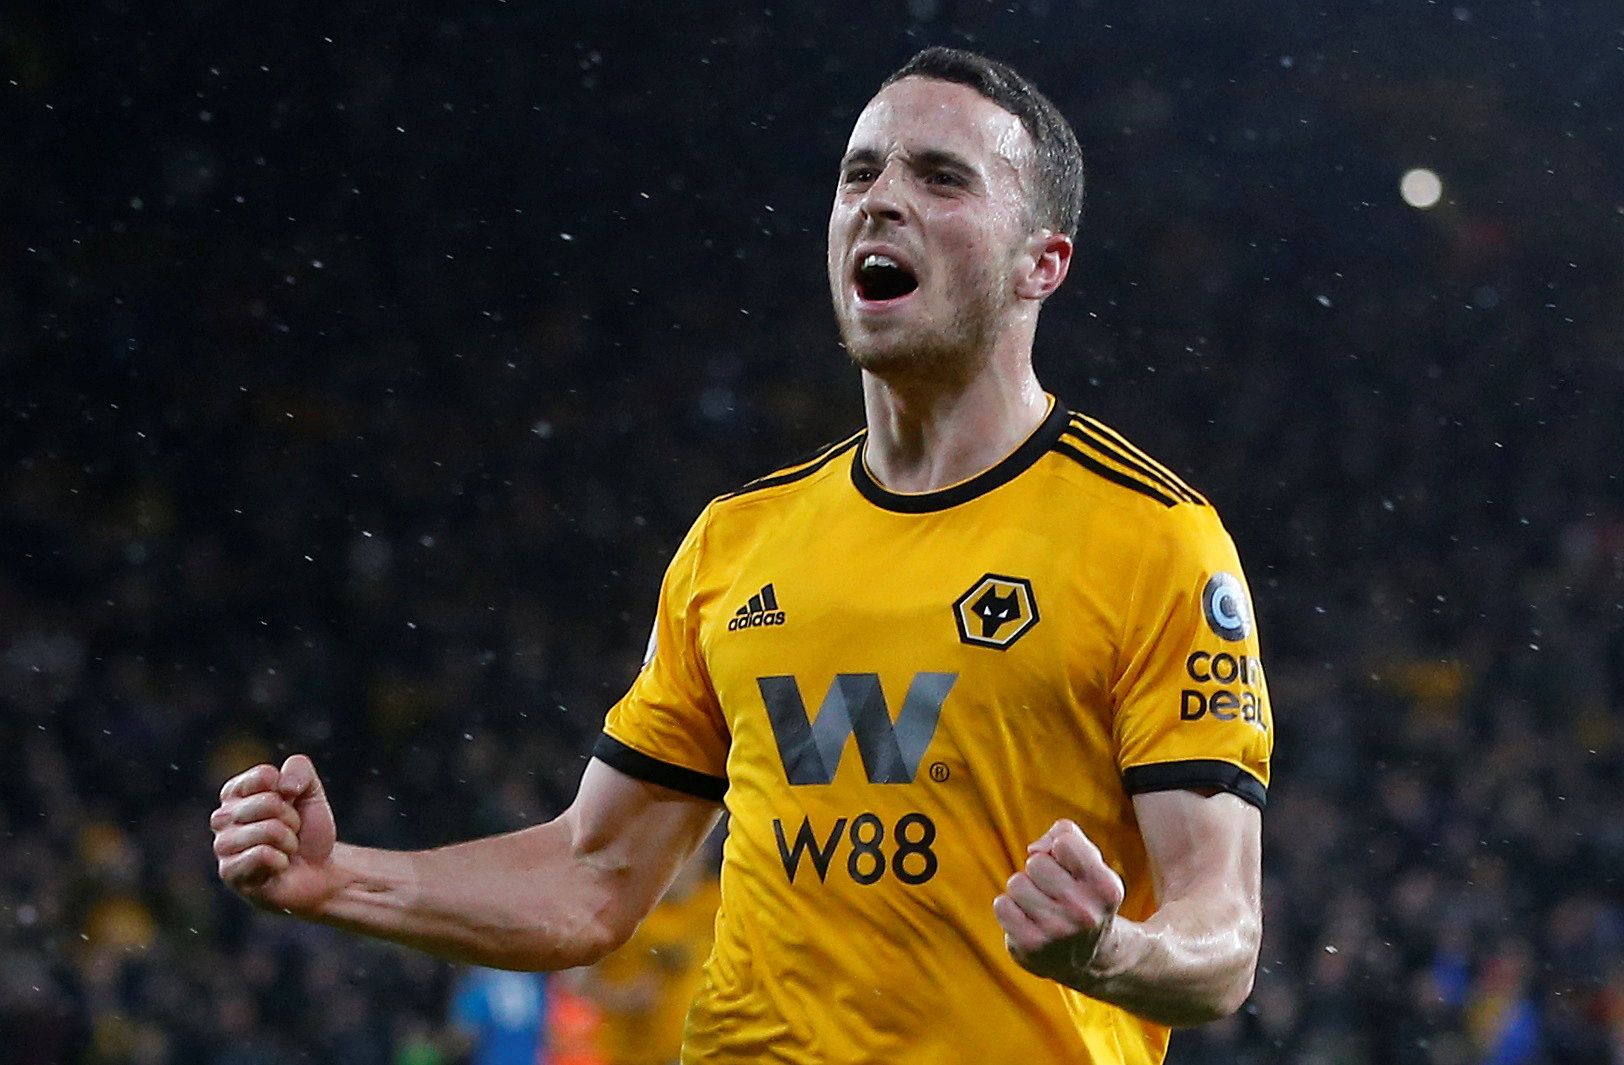 Diogo Jota celebrates scoring against Manchester United in the league. 